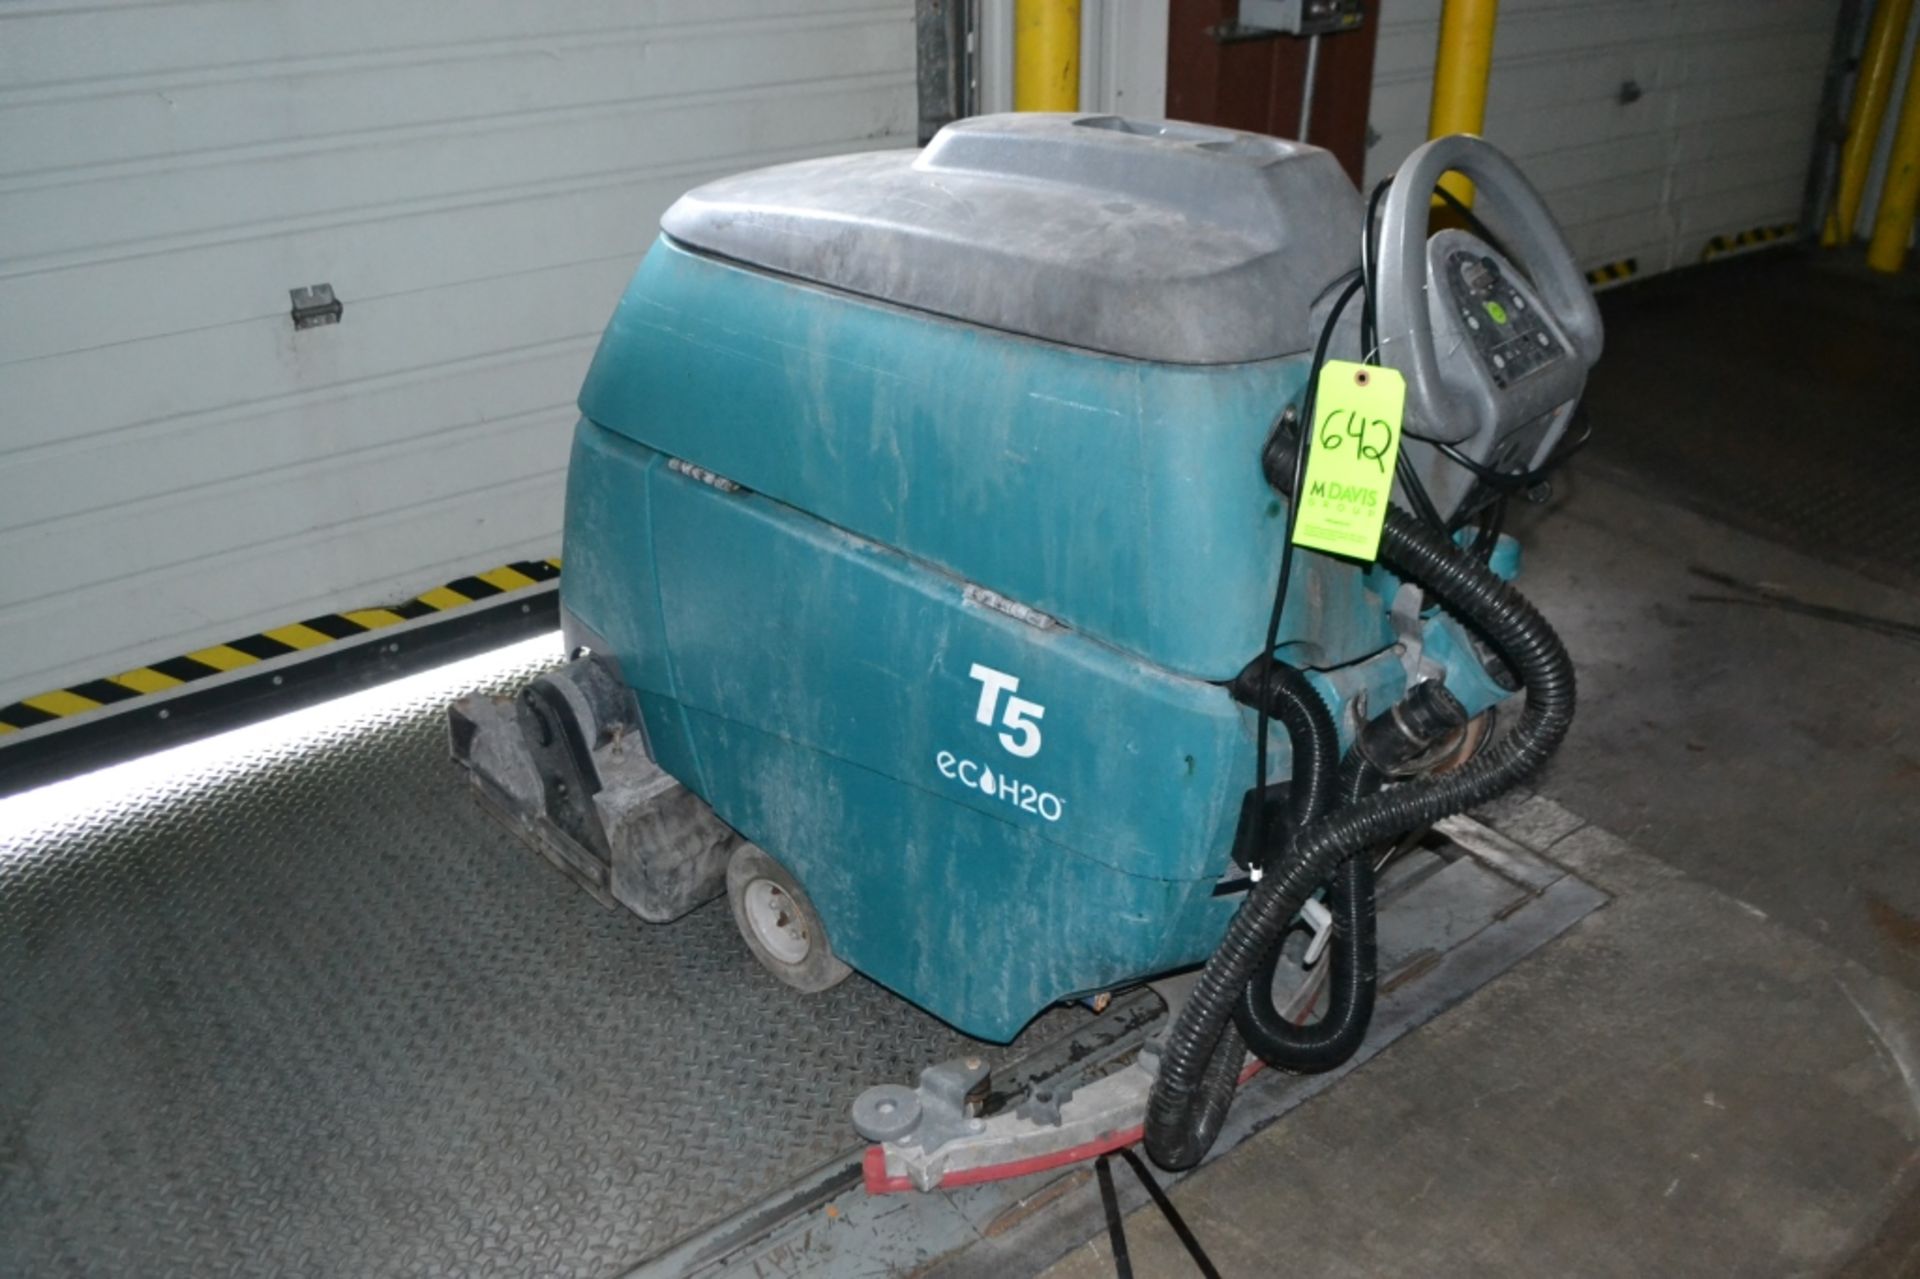 Tenant Electric Floor Cleaning Machine Model T-5 Echo 20 with Built In Charger